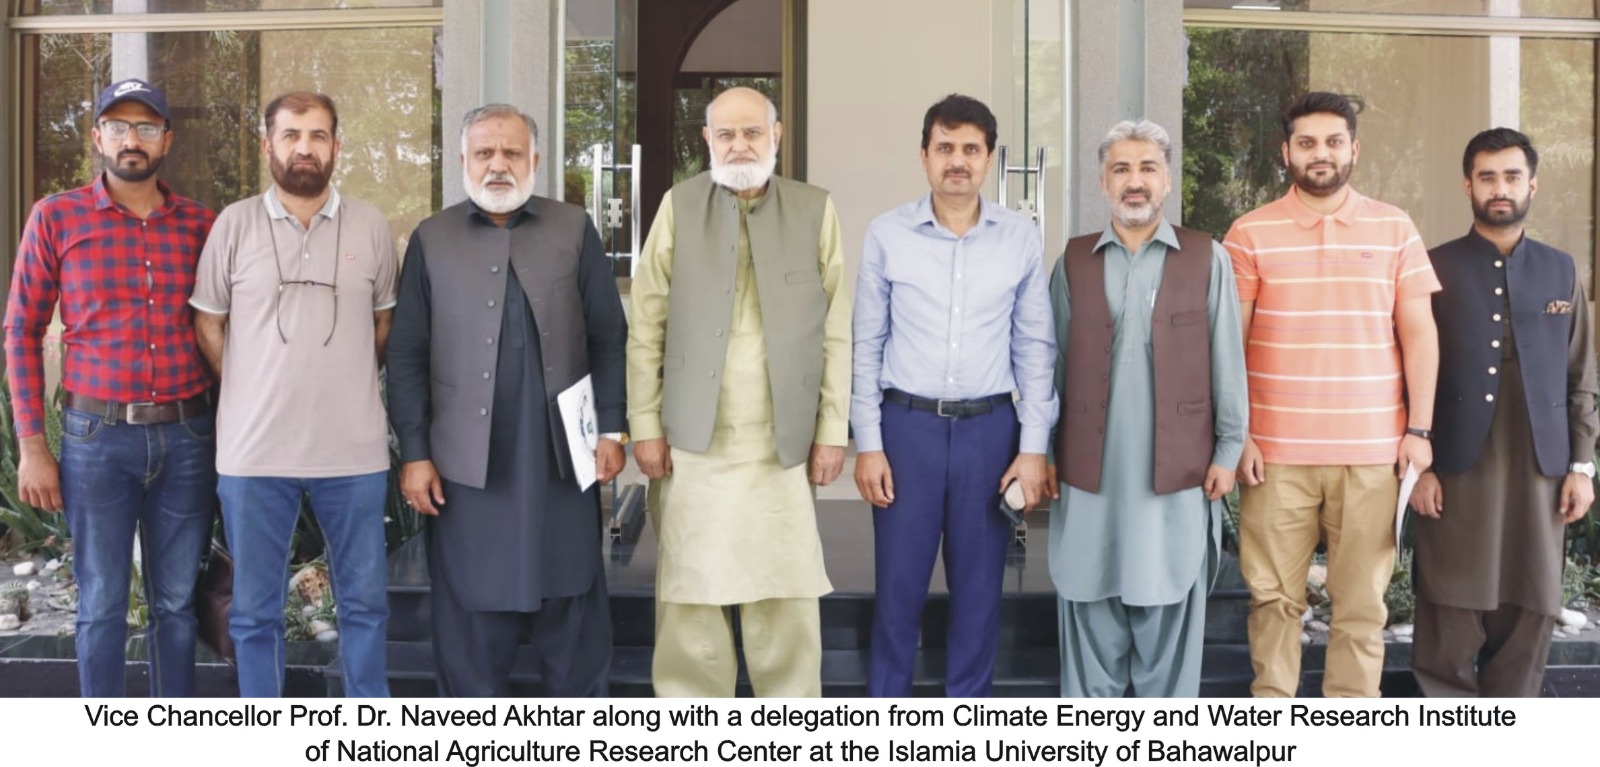 Climate Energy and Water Research Institute of National Agriculture Research Center visit IUB